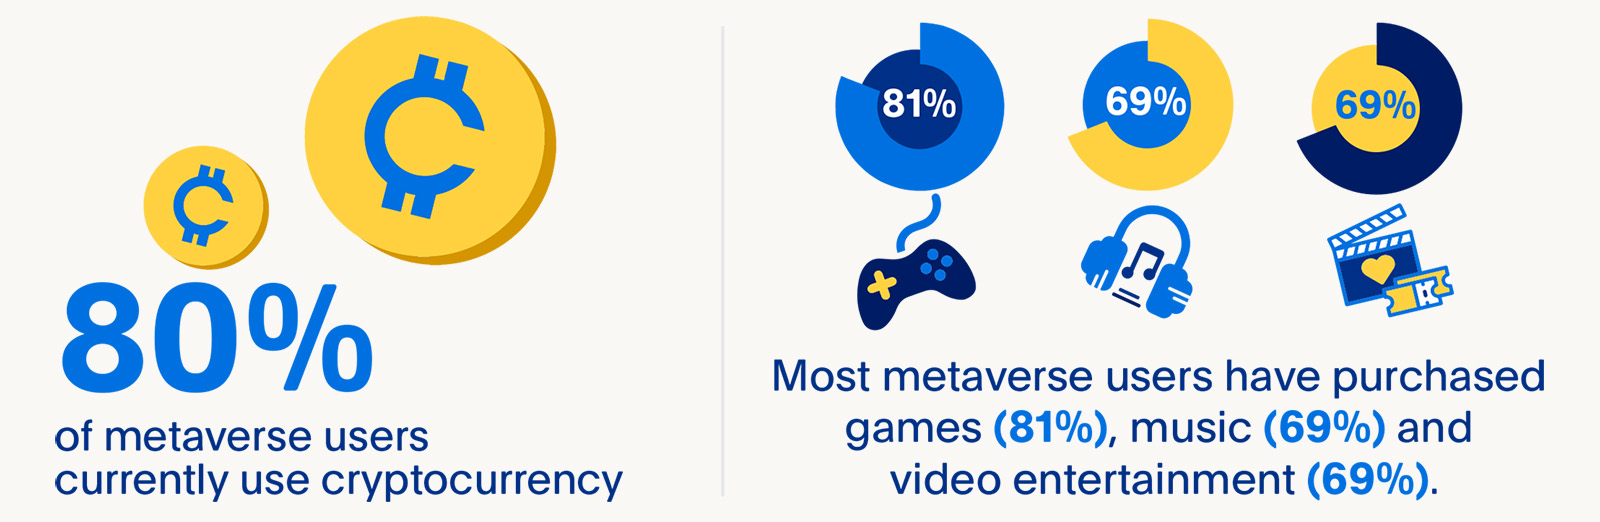 graphic representing cryptocurrency use in the metaverse